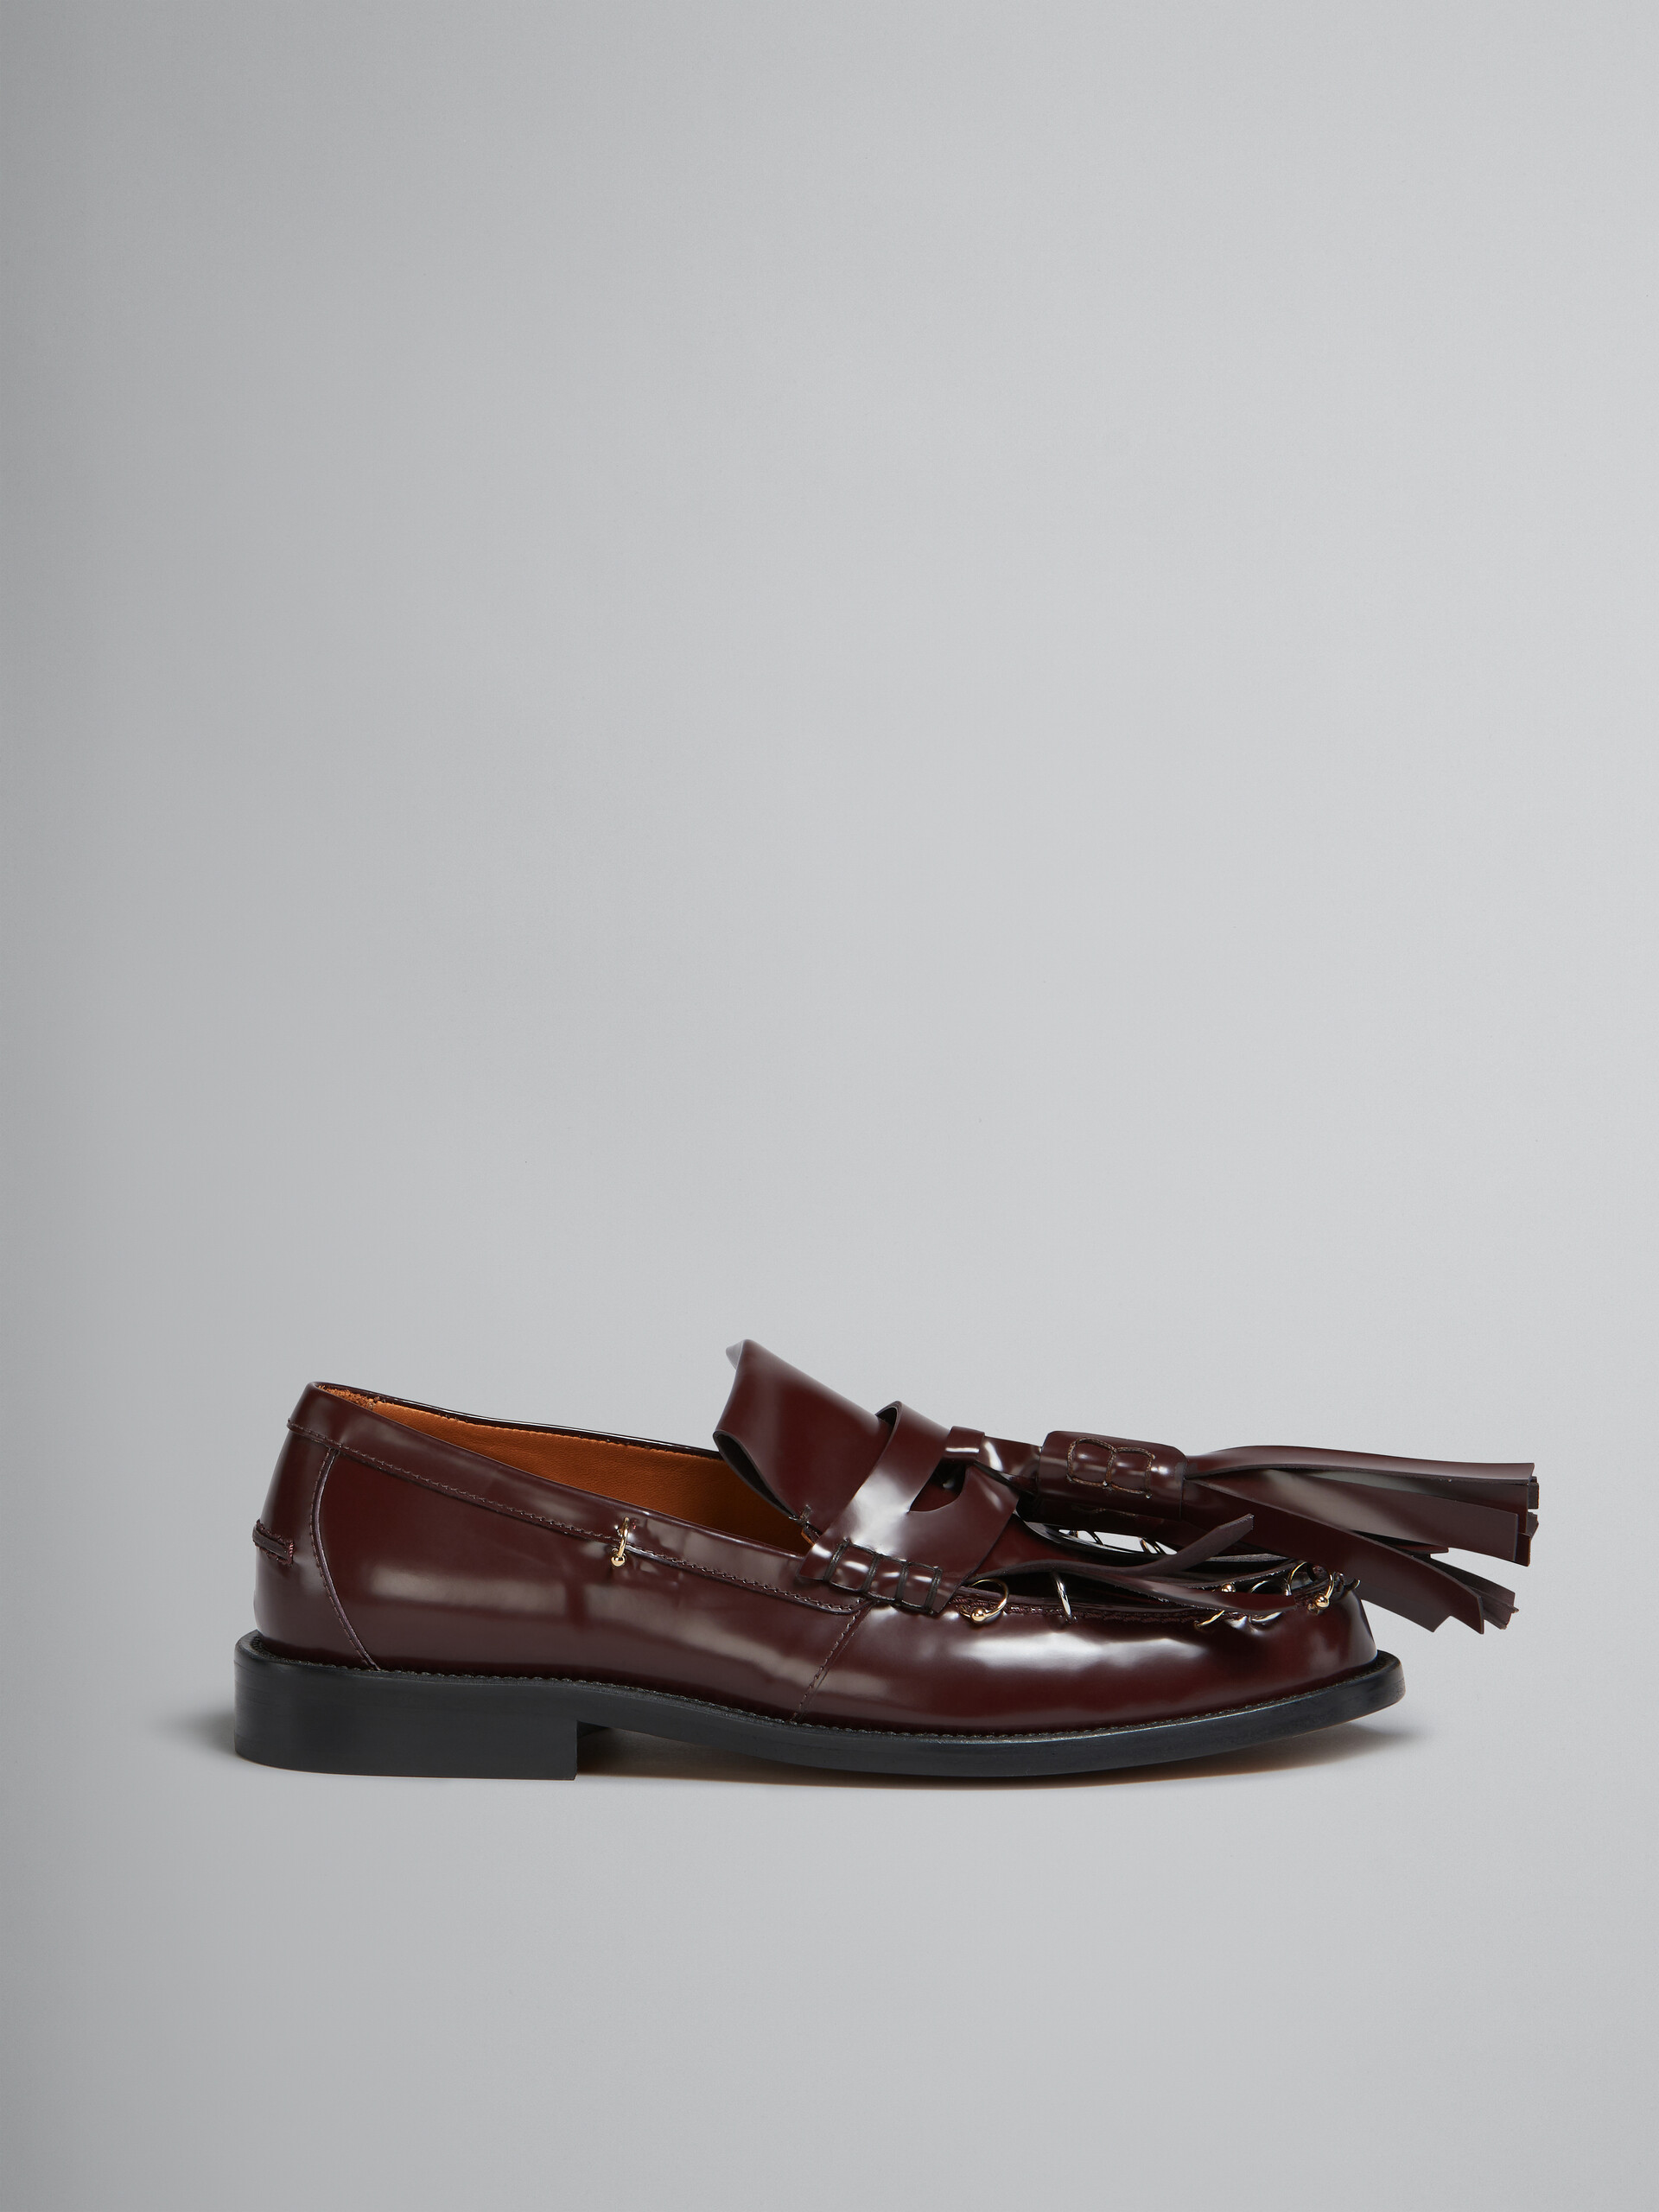 Black leather Bambi loafer with maxi tassels - Mocassin - Image 1